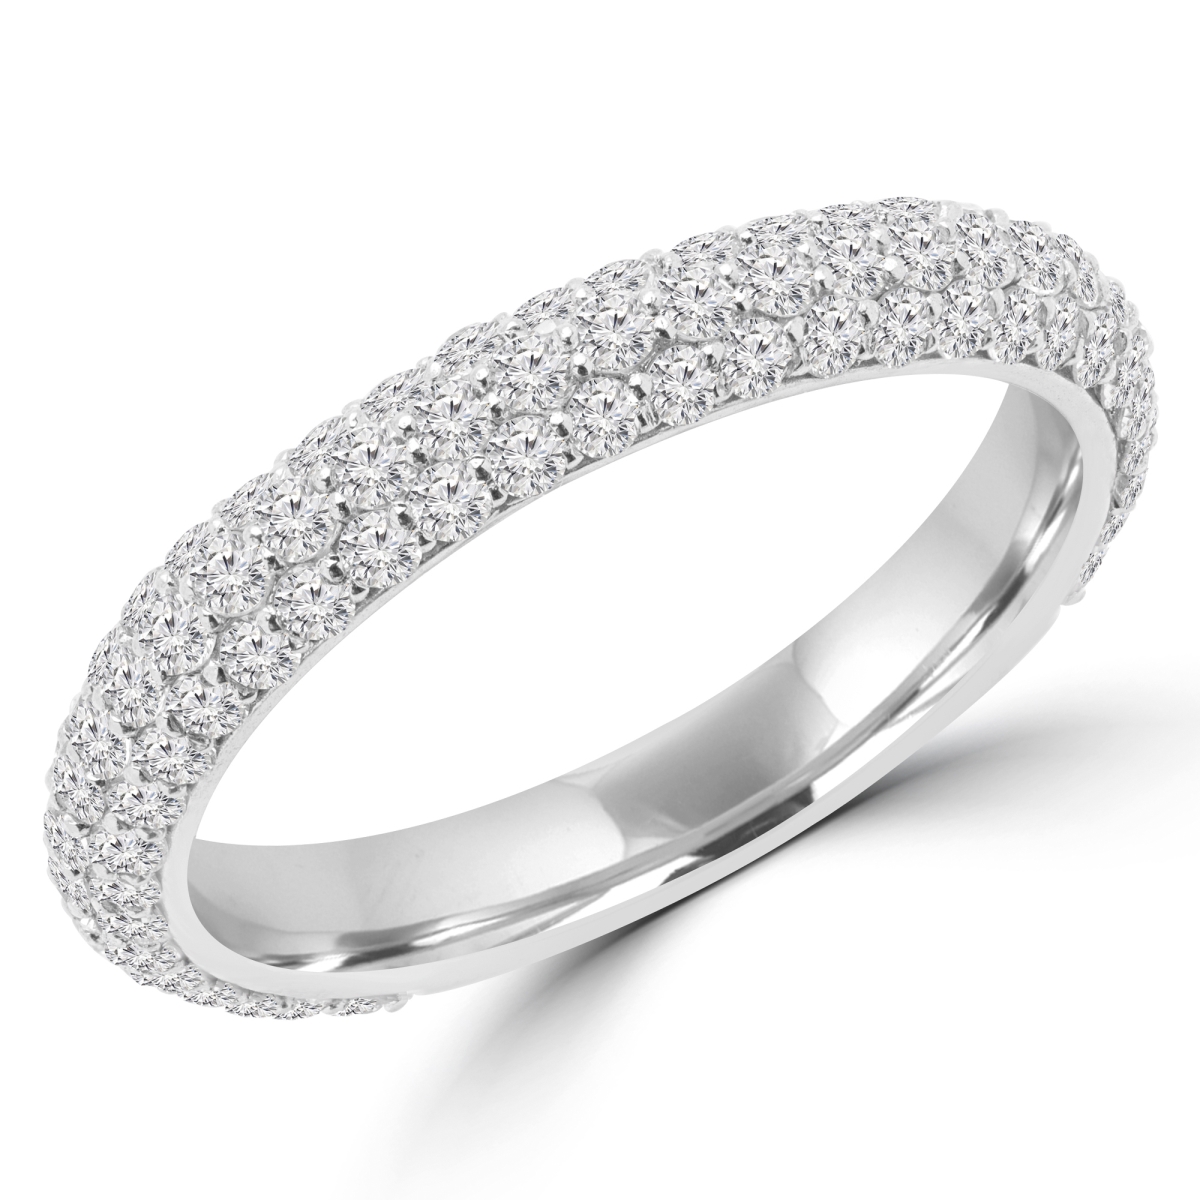 Picture of Majesty Diamonds MD170166-7.75 1.1 CTW Round Diamond Semi-Eternity Wedding Band Ring in 14K White Gold - 7.75